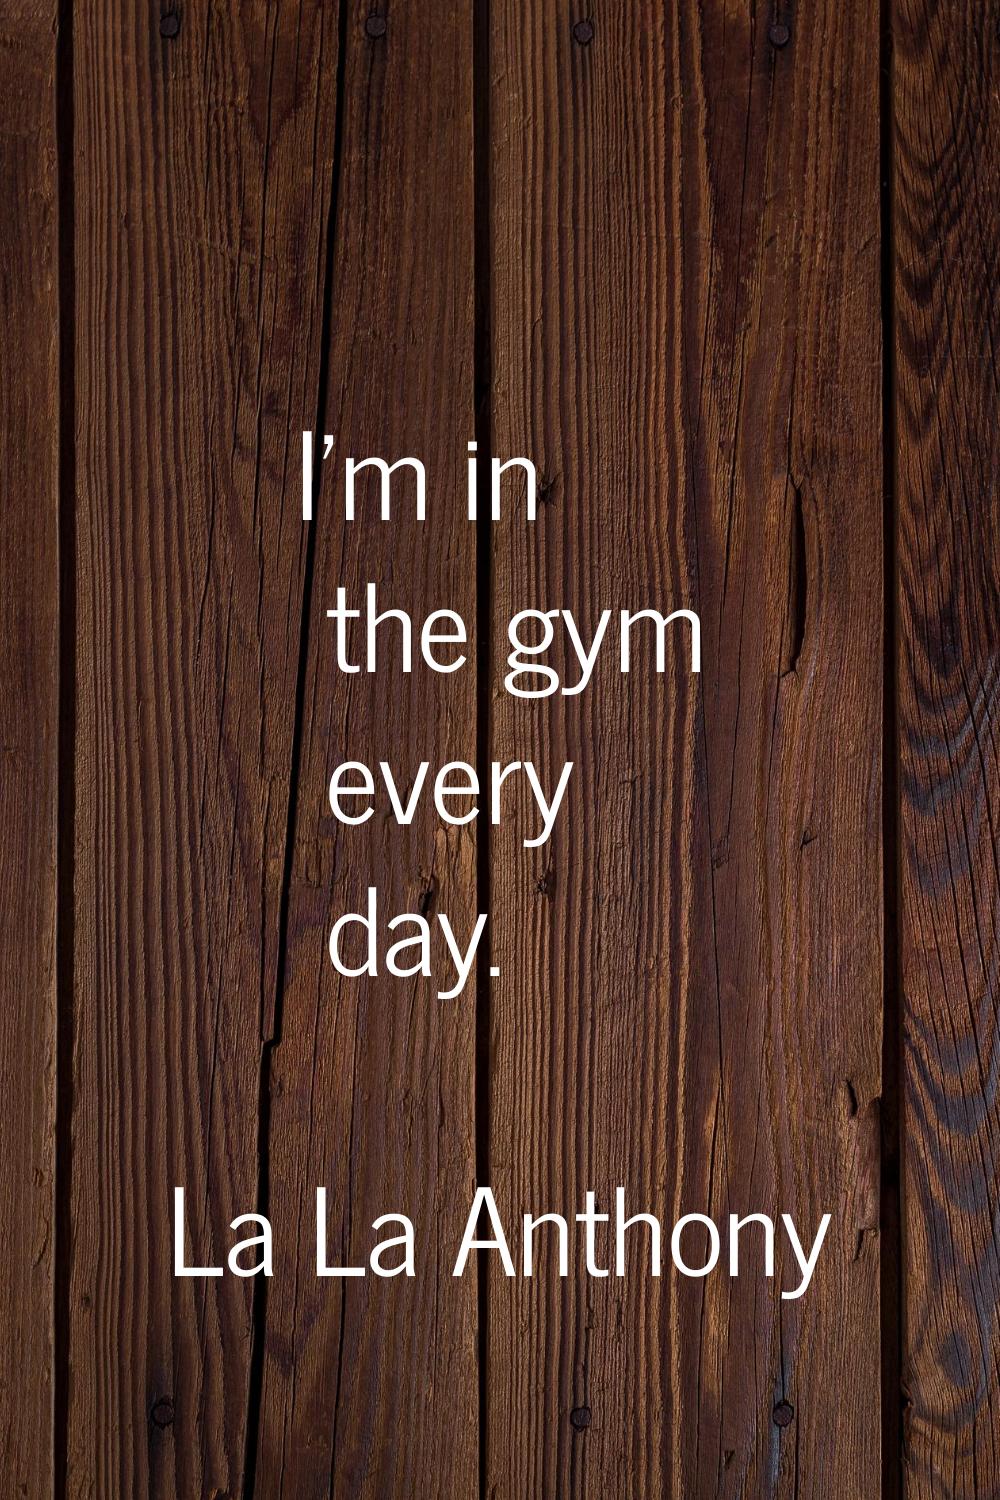 I'm in the gym every day.